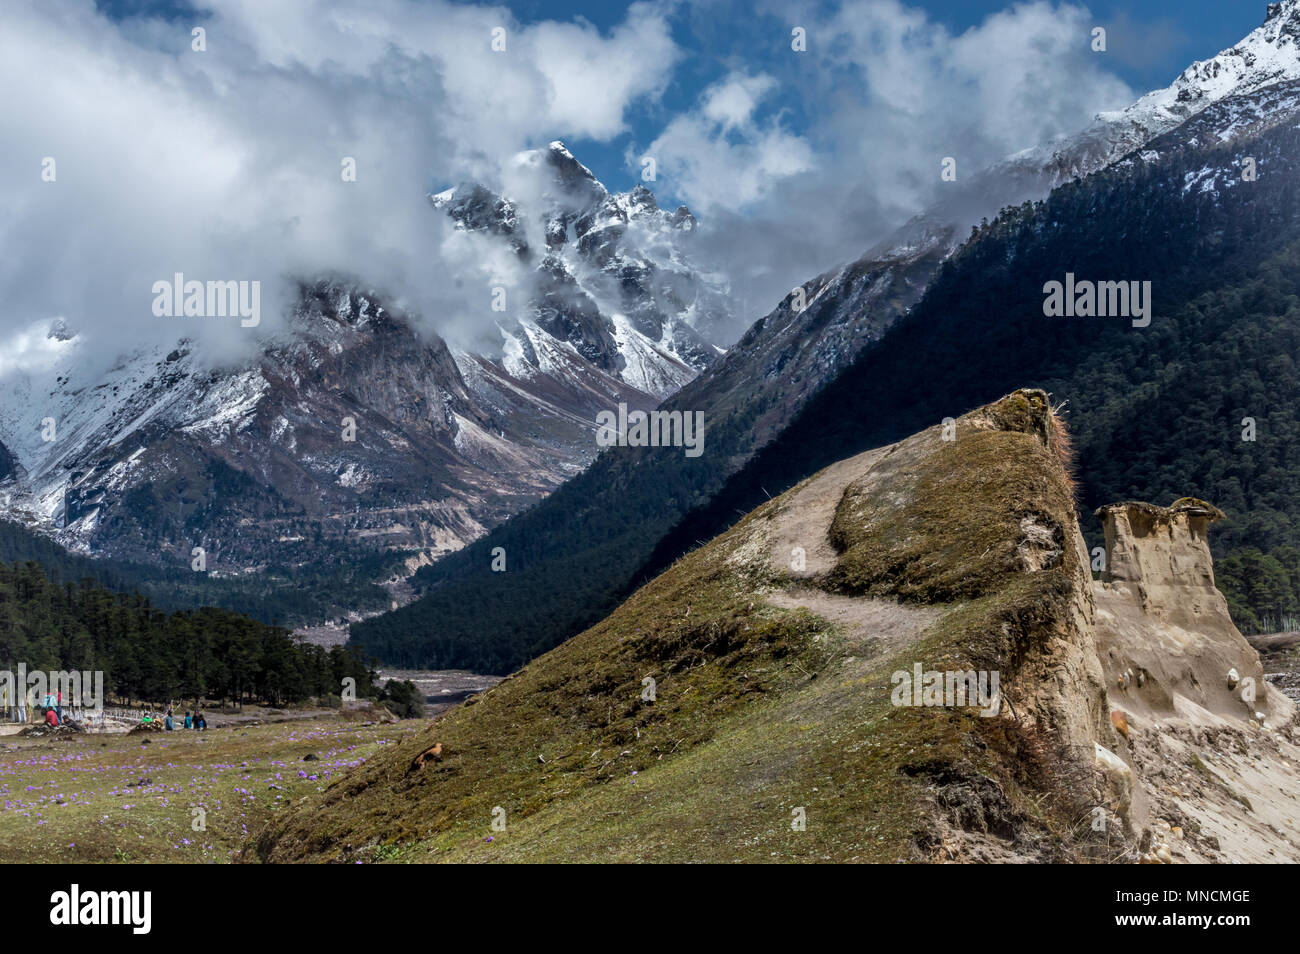 Yumthang valley, a popular tourist attraction and nature camp area on the eastern Himalayas, Sikkim, India Stock Photo